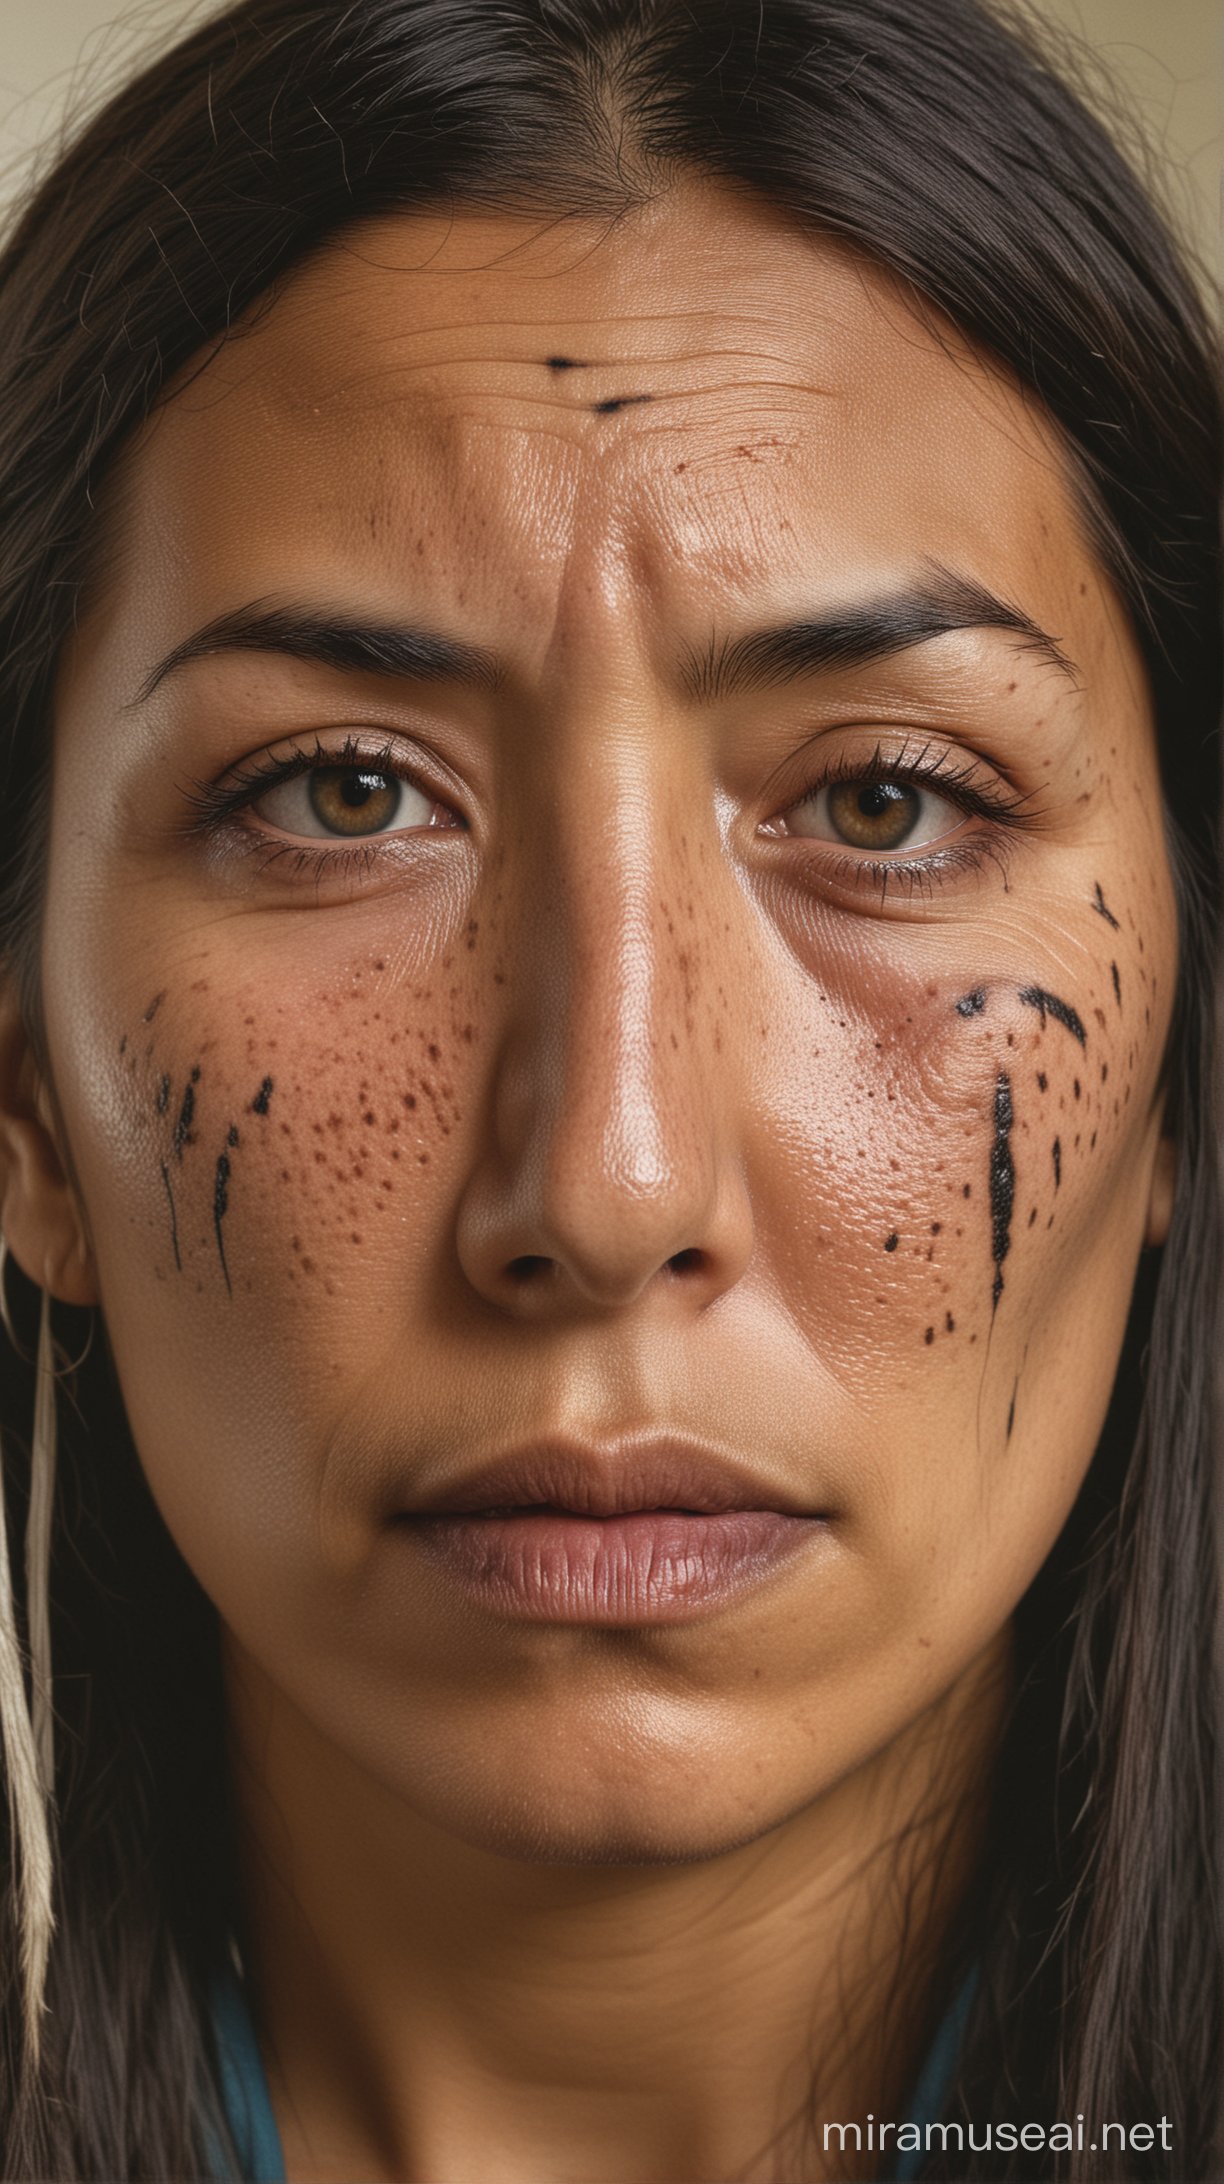 A portrait reflecting the painful gaze of a Native American woman subjected to forced sterilization; the woman's face shows scars and the helplessness in her eyes is clear.
